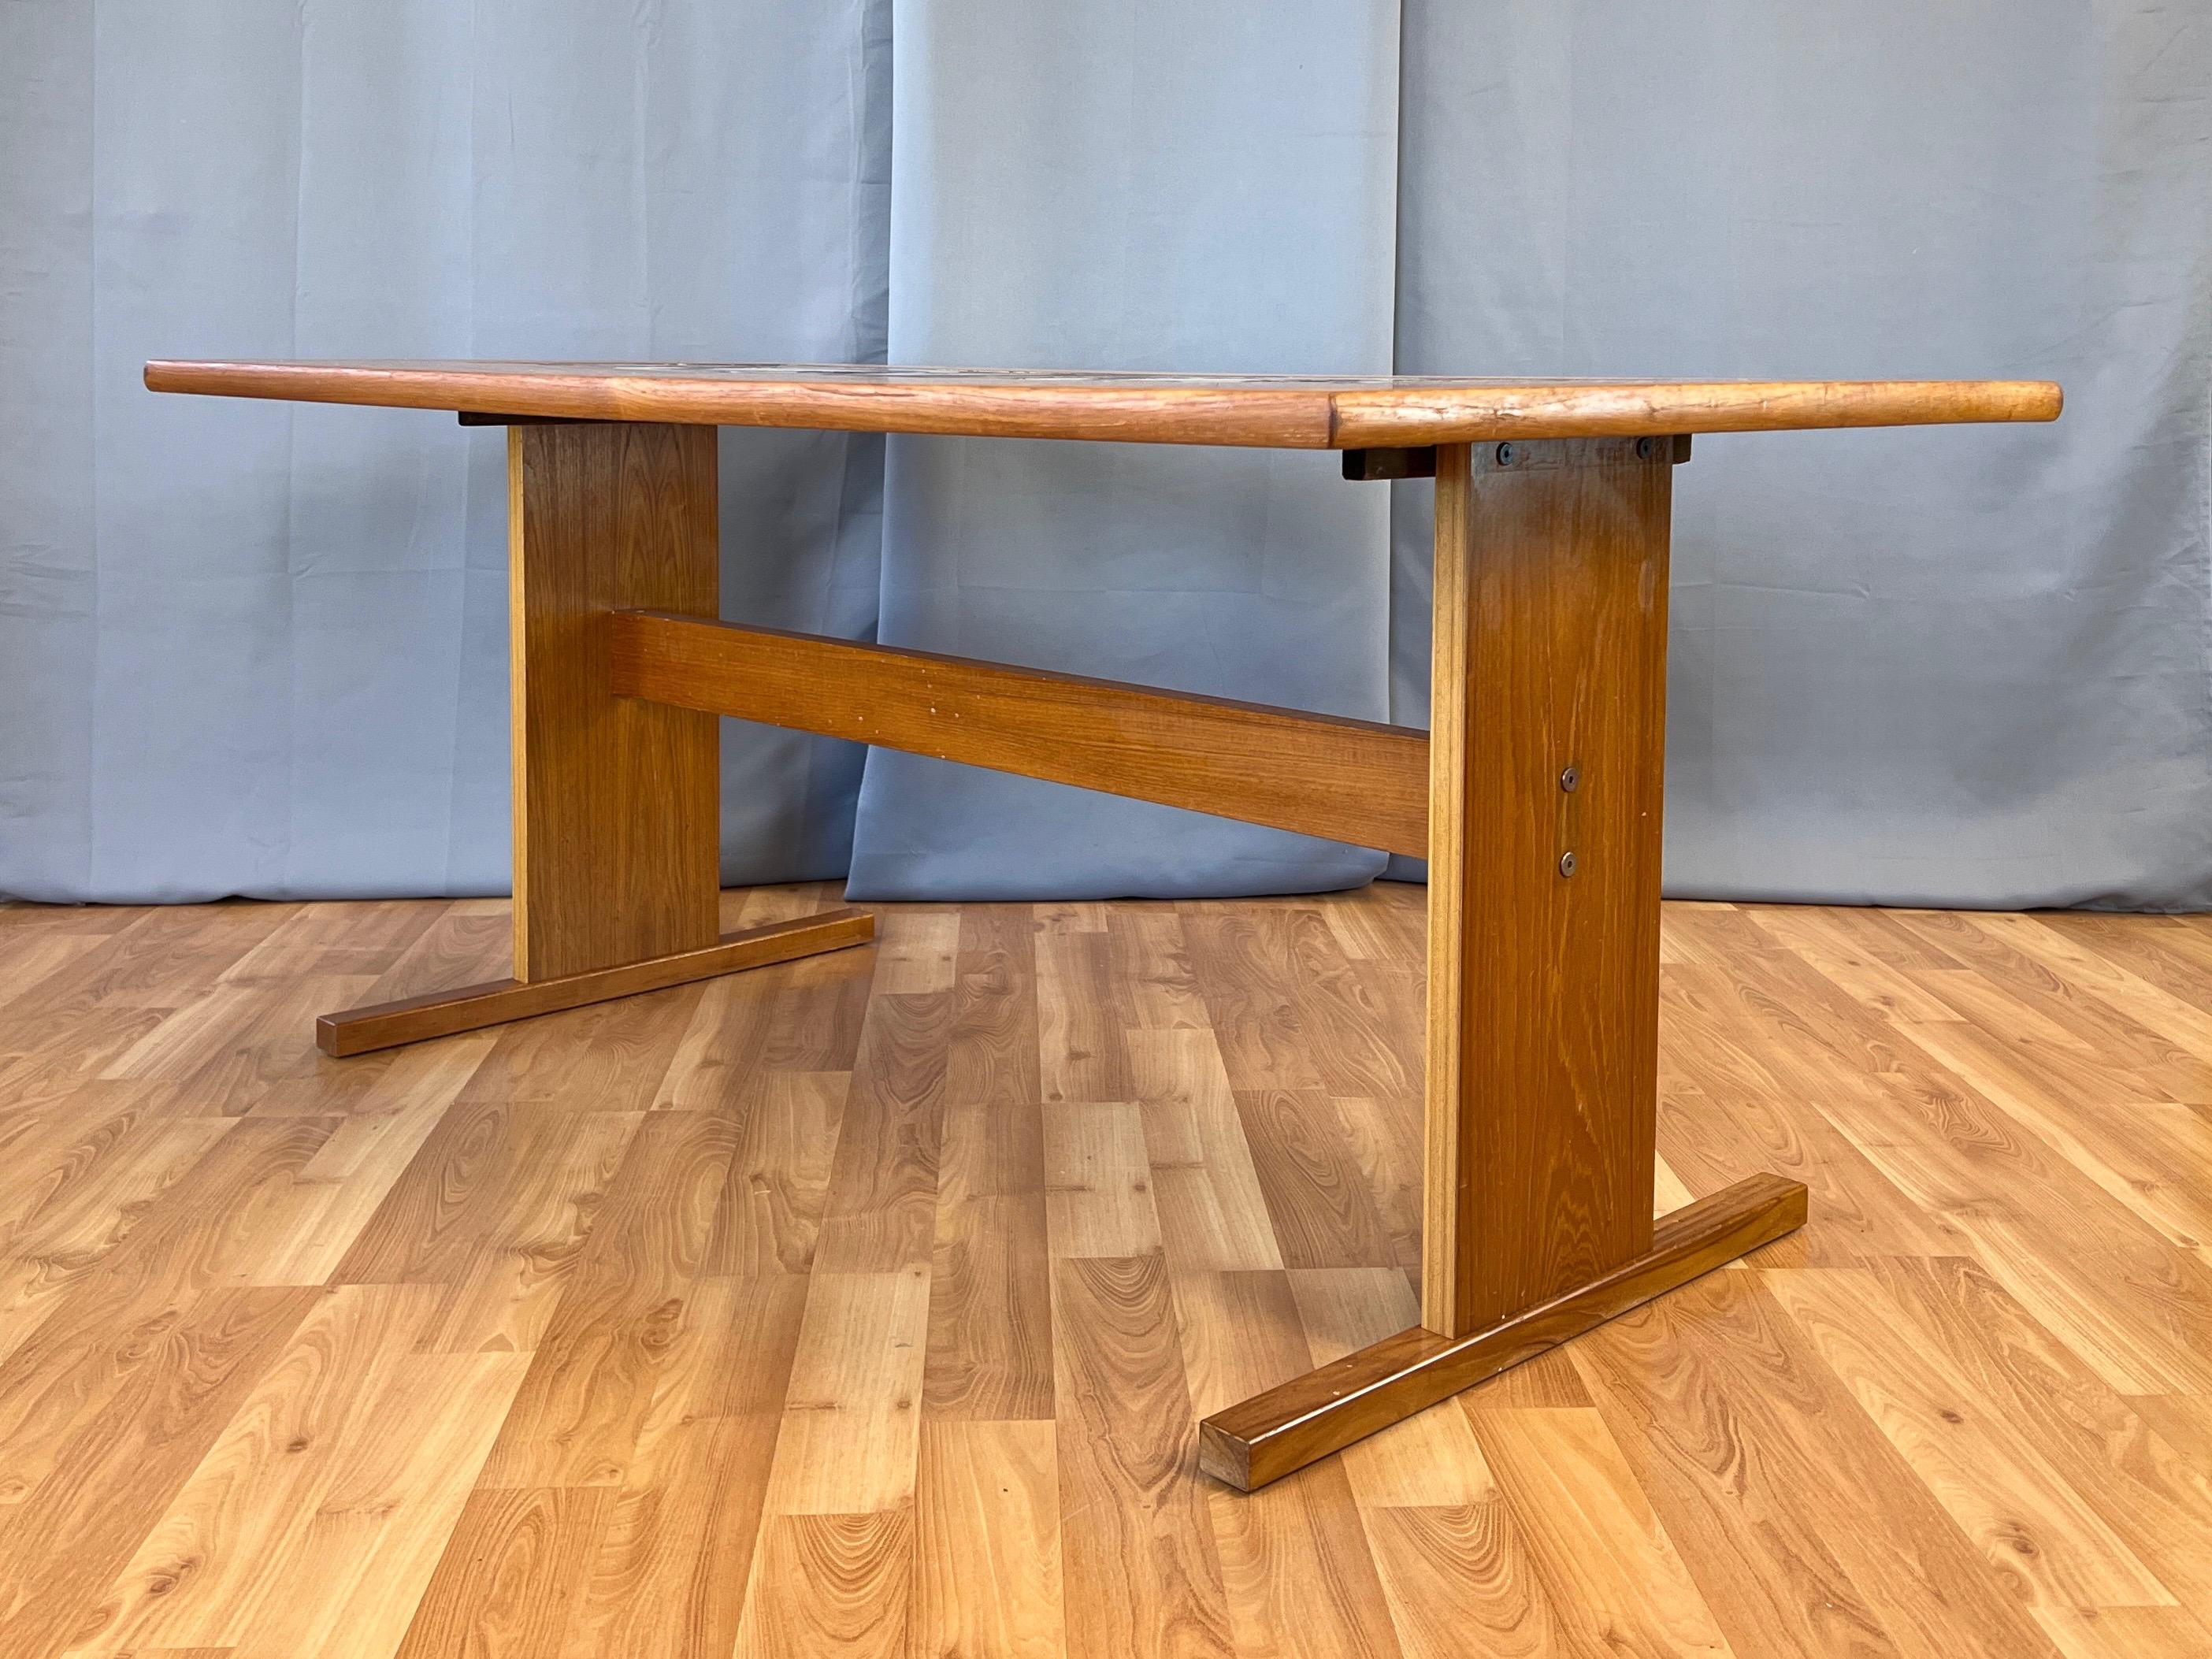 Late 20th Century Danish Modern Gangsø Møbler Teak Dining Table with Tile Top by P. Hermann, 1970s For Sale